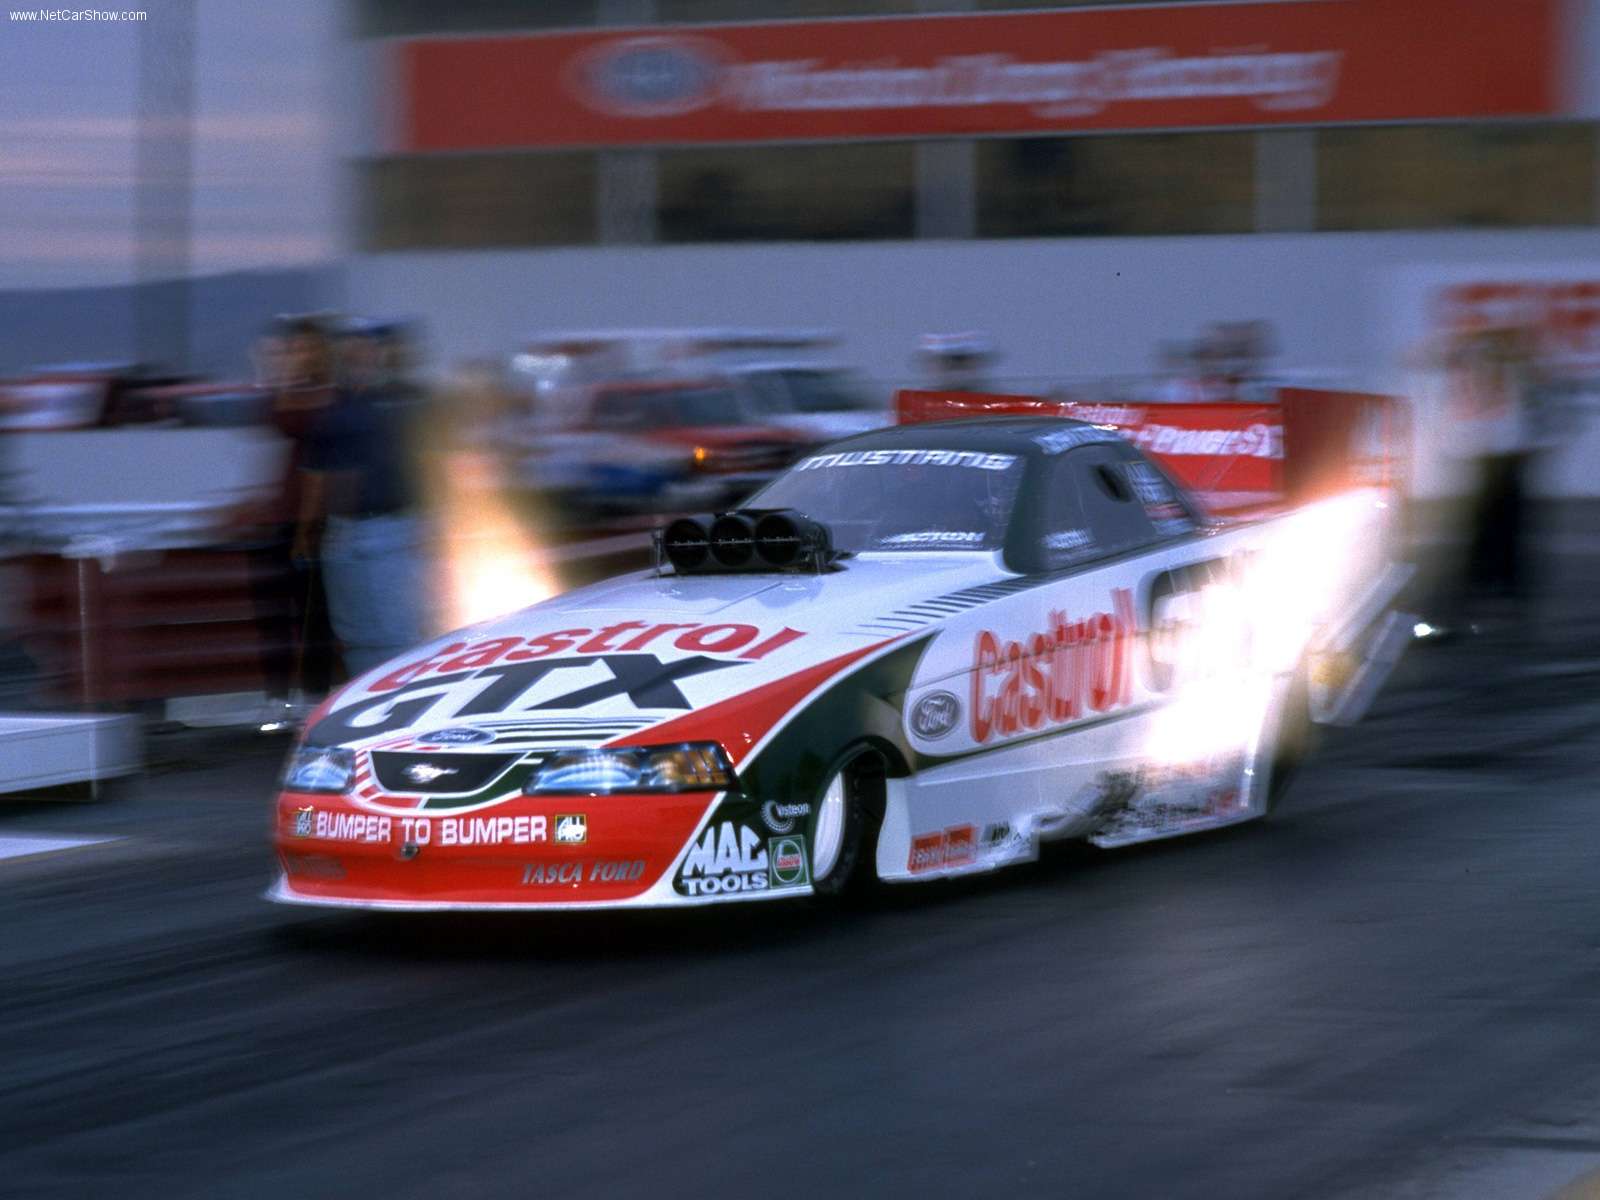 Other Drag Racing picture # 67094. Other photo gallery